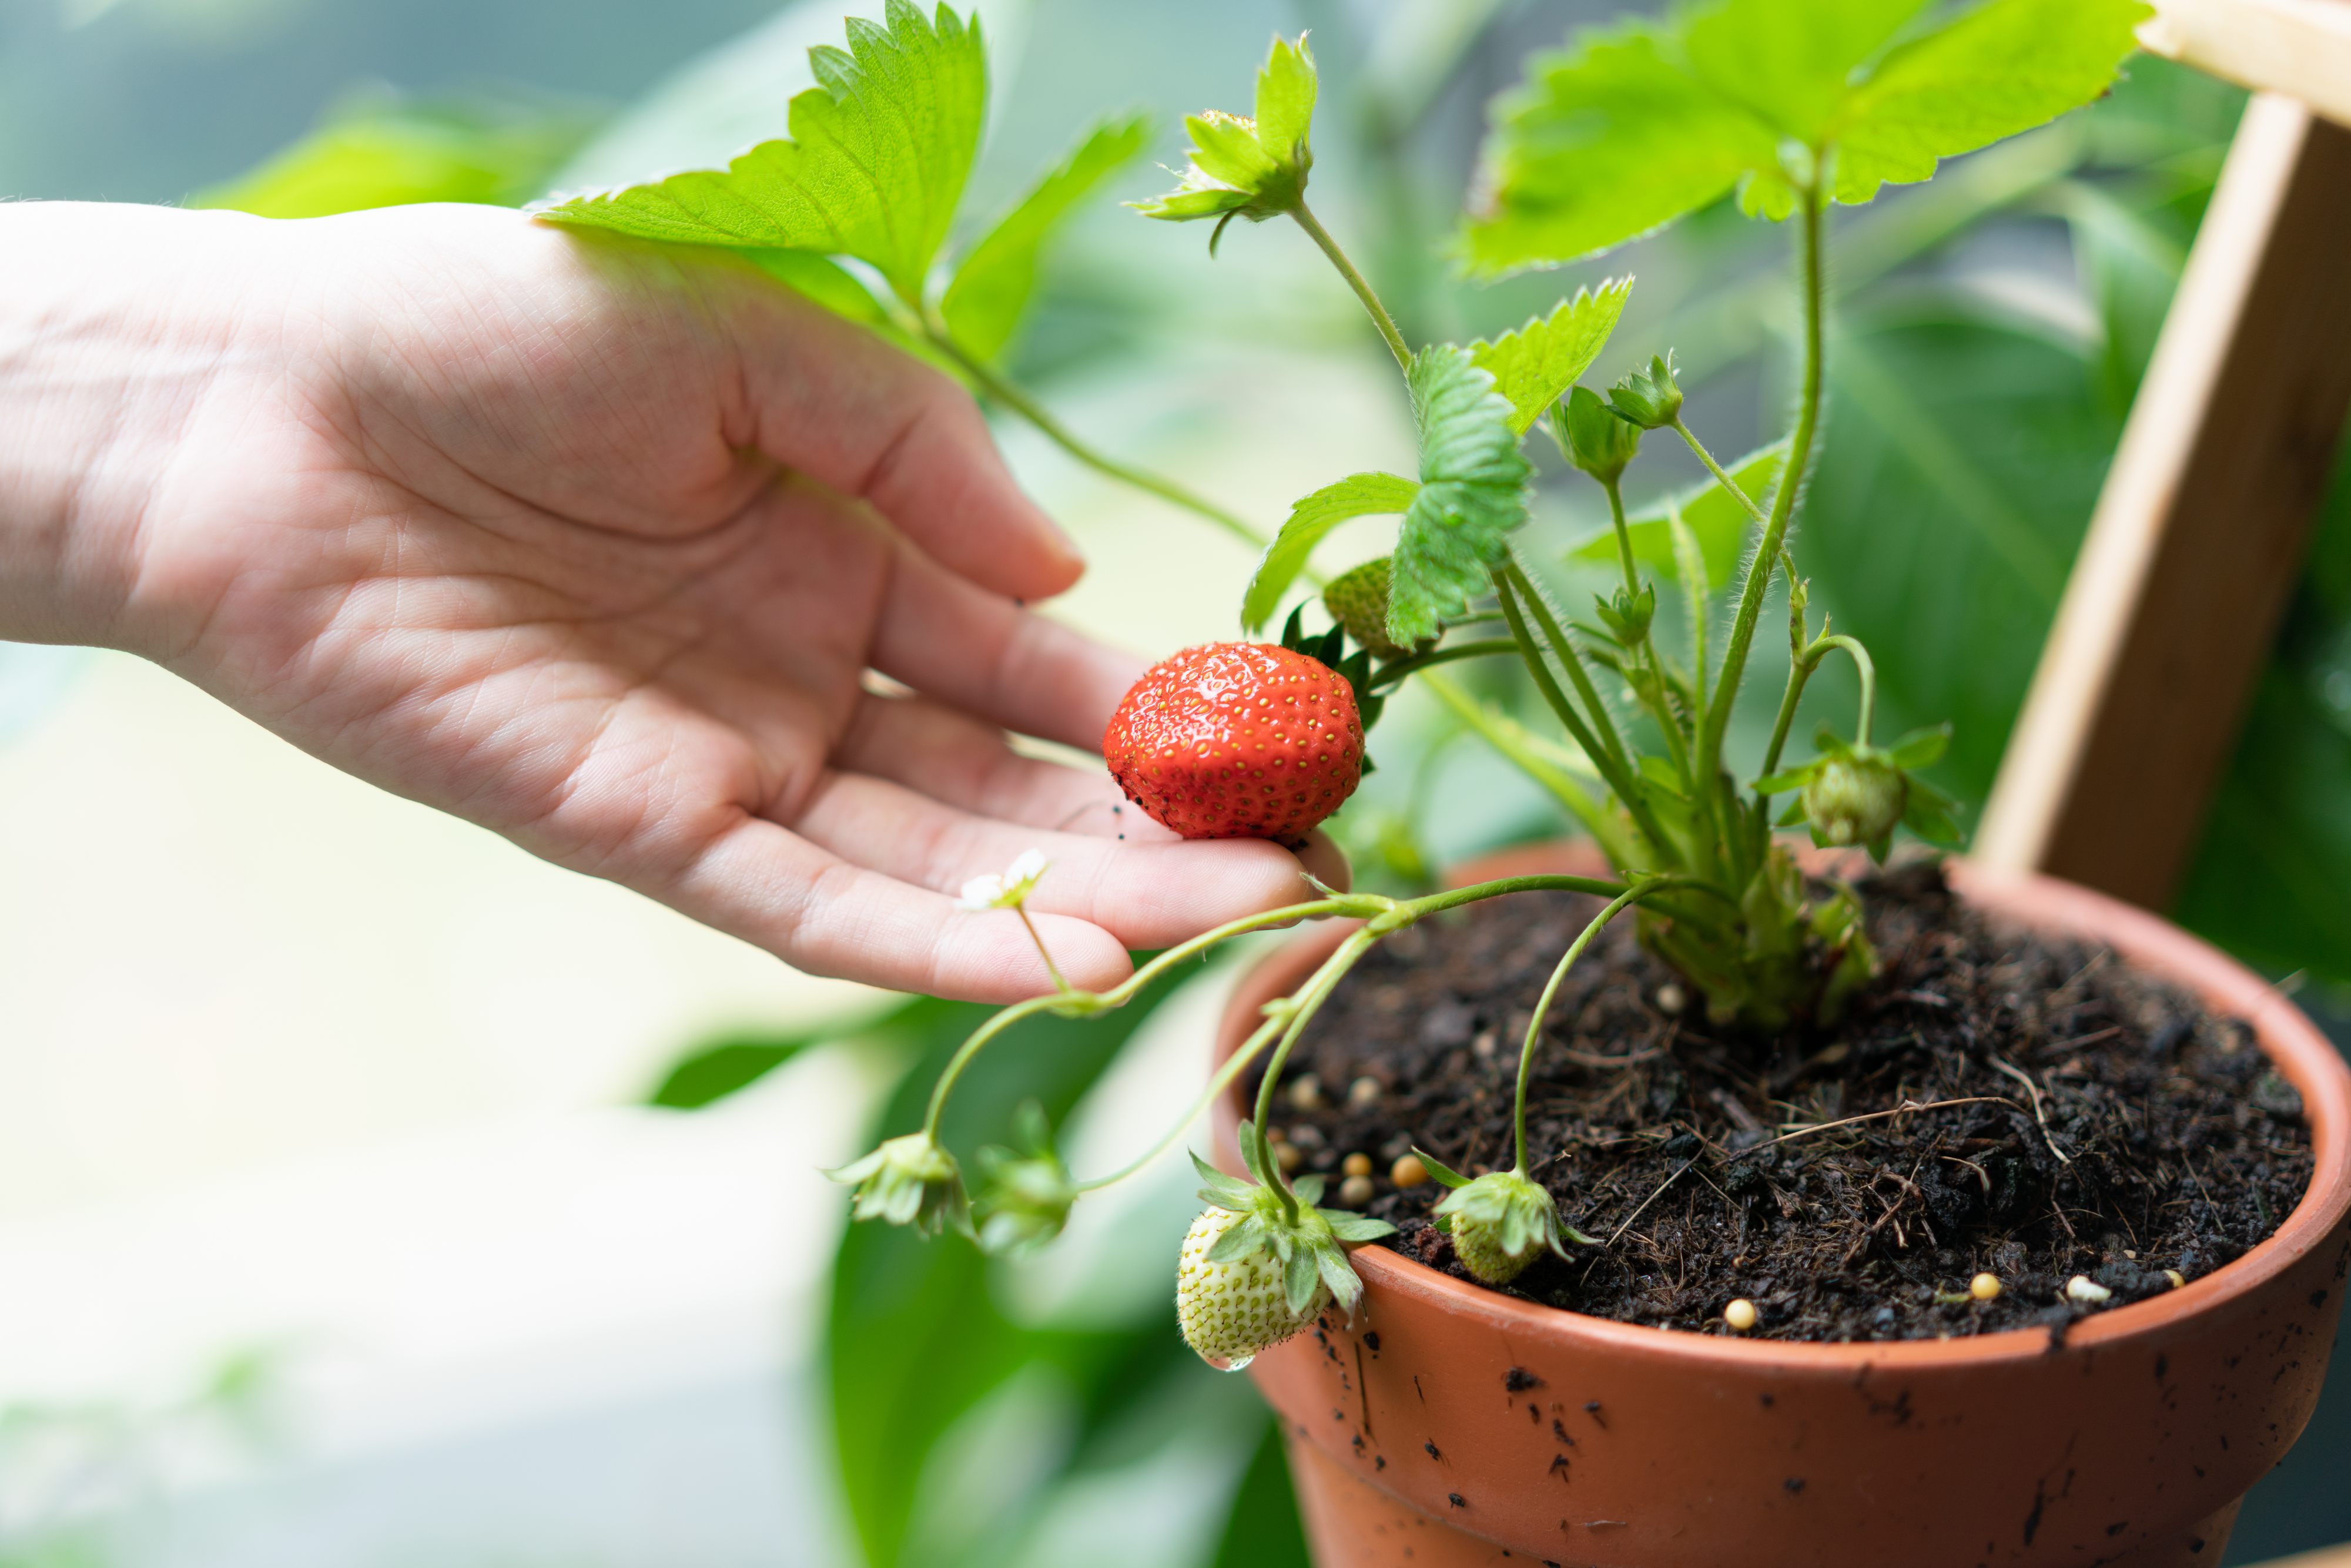 hand holding a strawberry growing on a potted plant